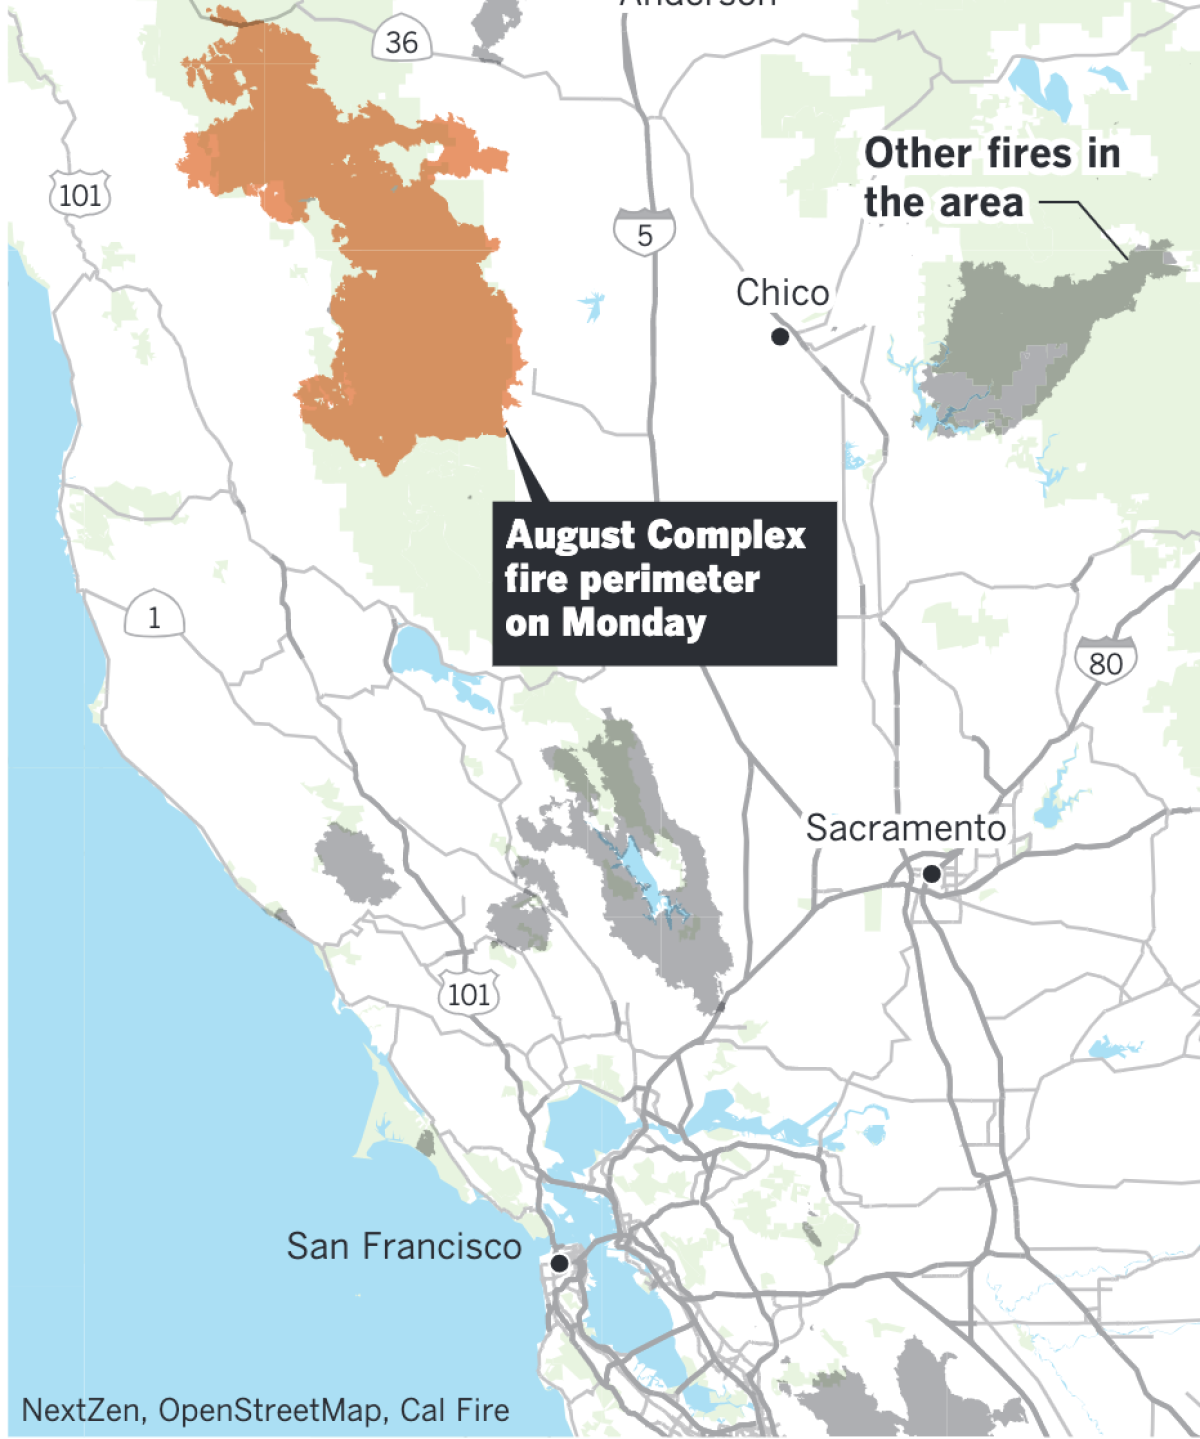 A California map shows the location of the August Complex fire.